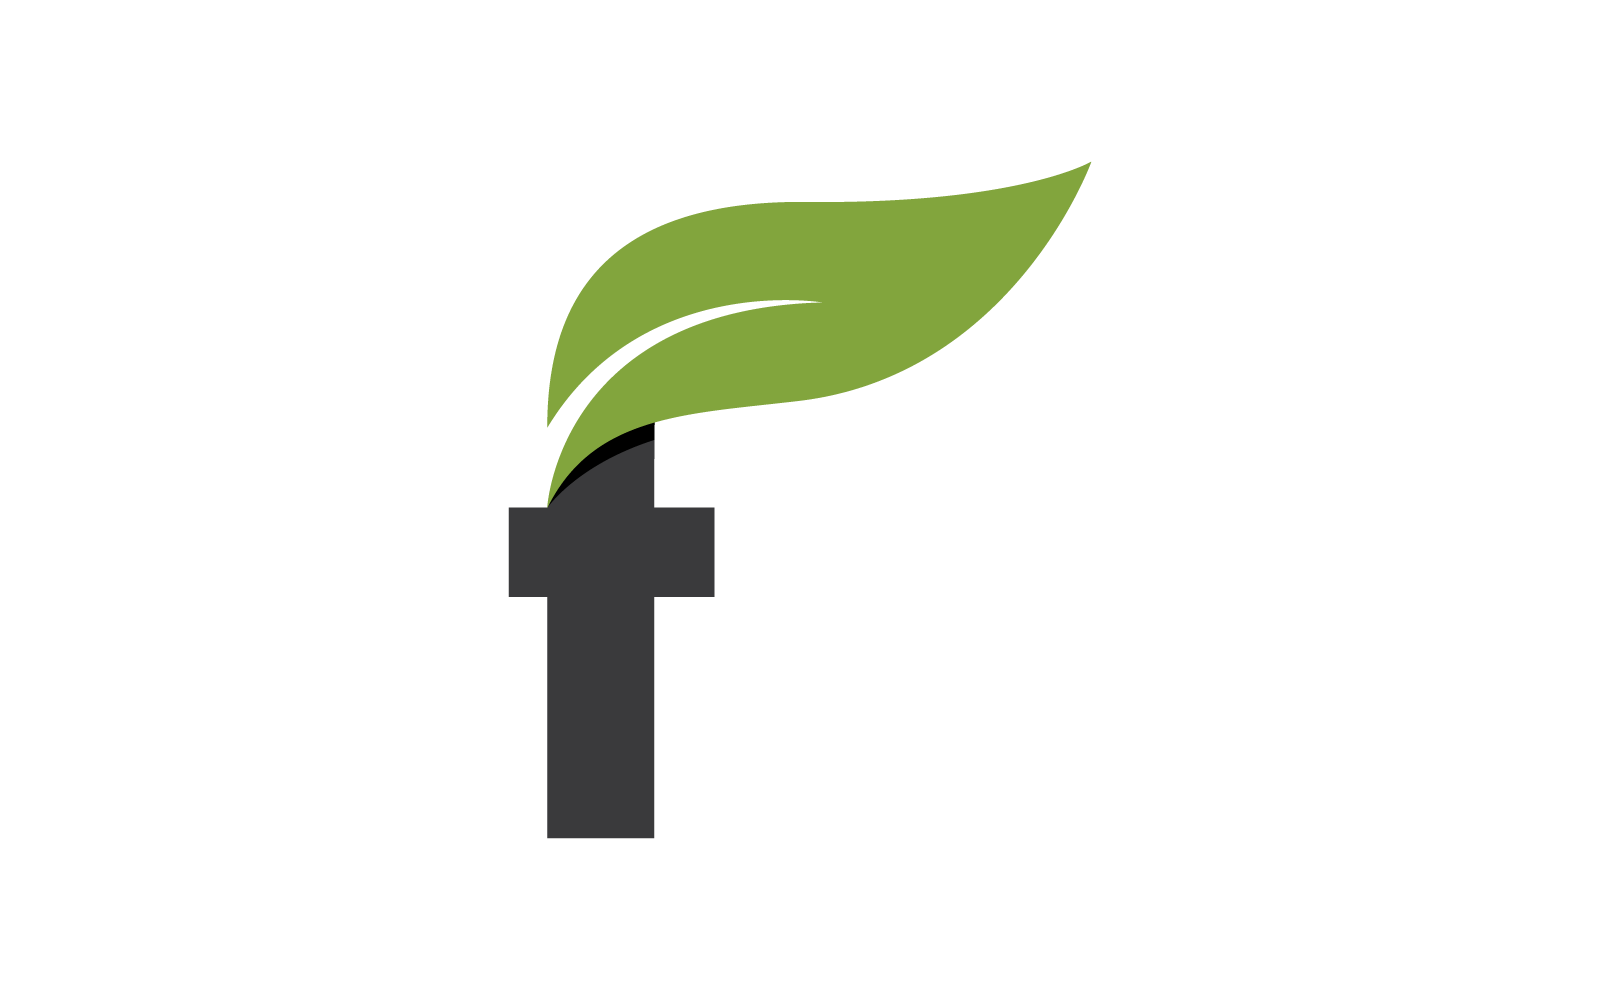 F Initial letter with green leaf logo vector flat design